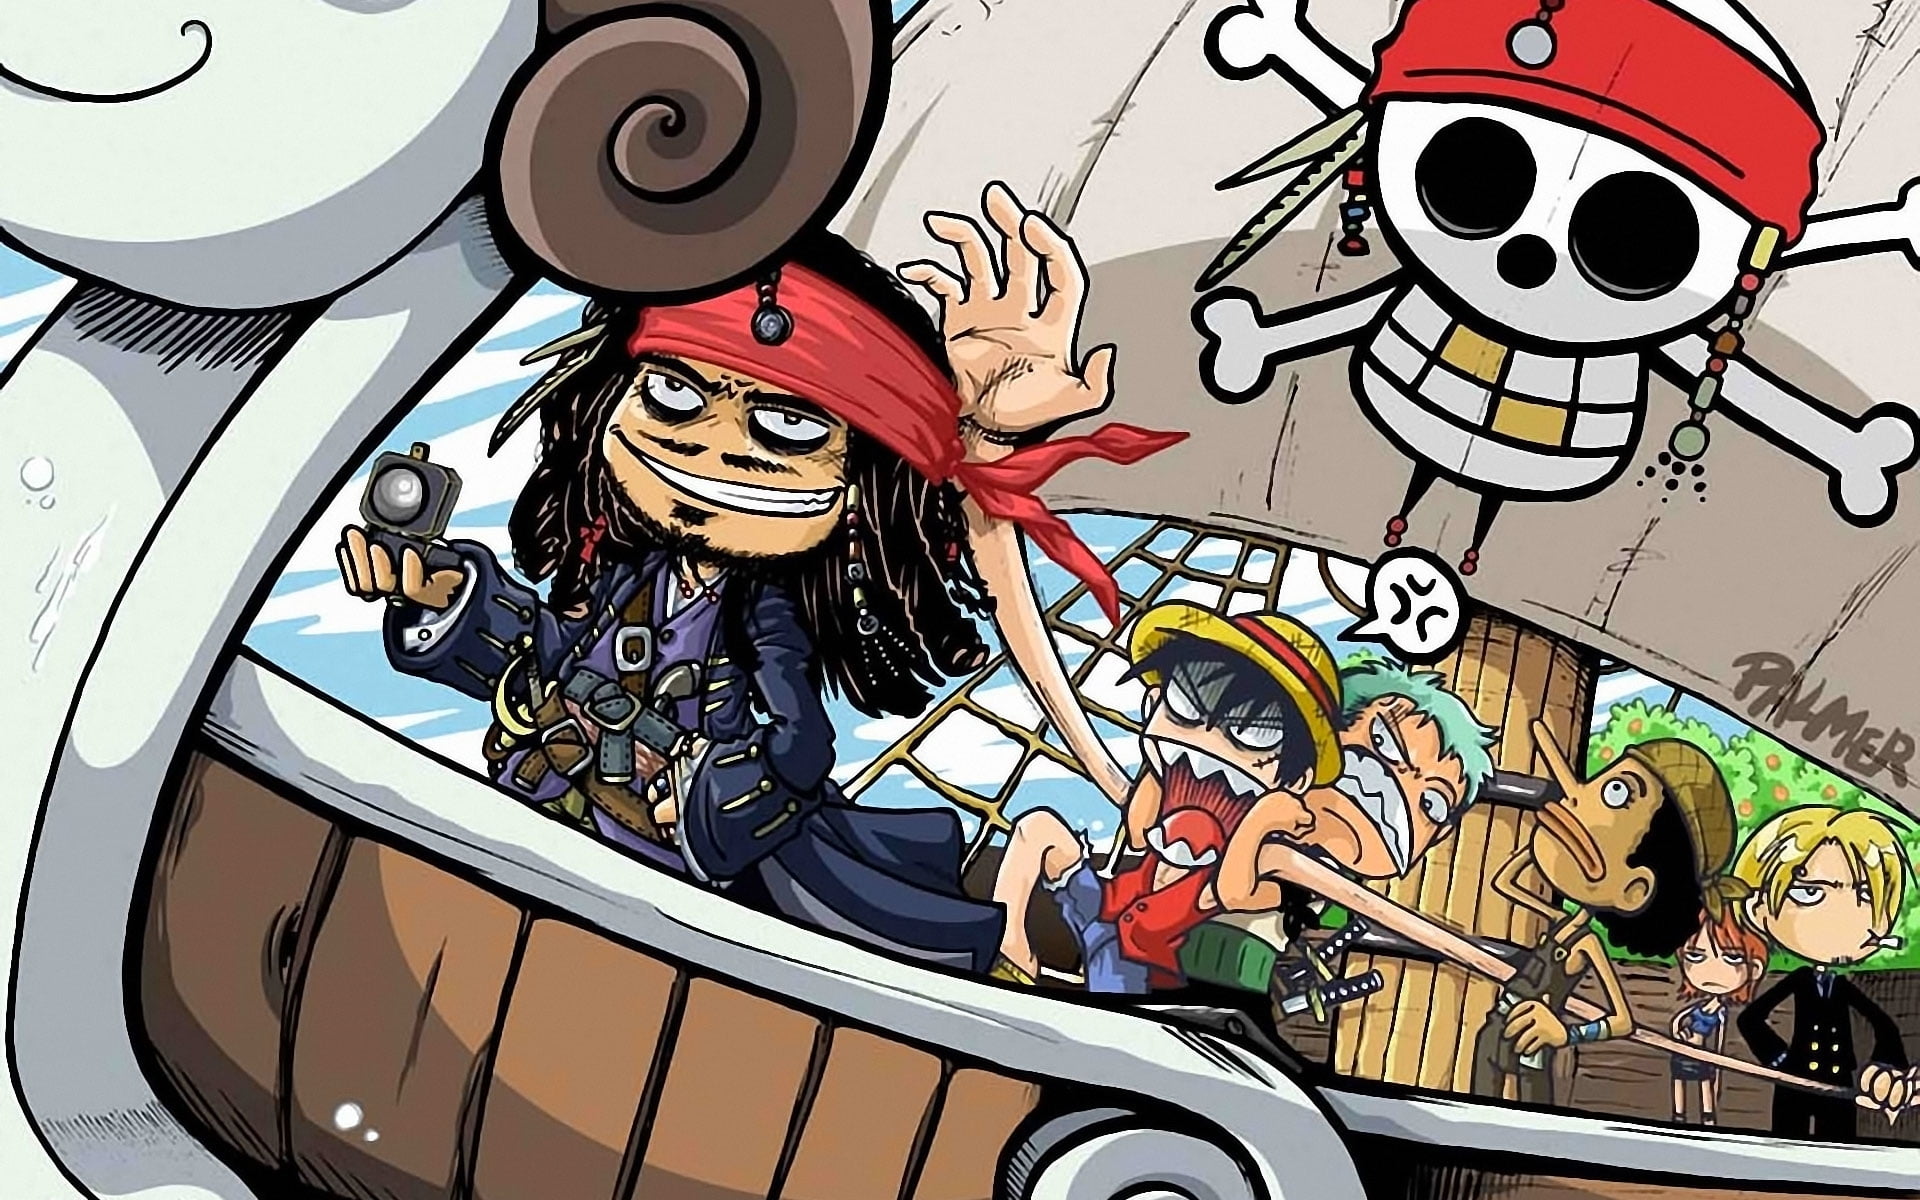 humor, Jack Sparrow, One Piece, Pirates of the Caribbean, Monkey D. Luffy